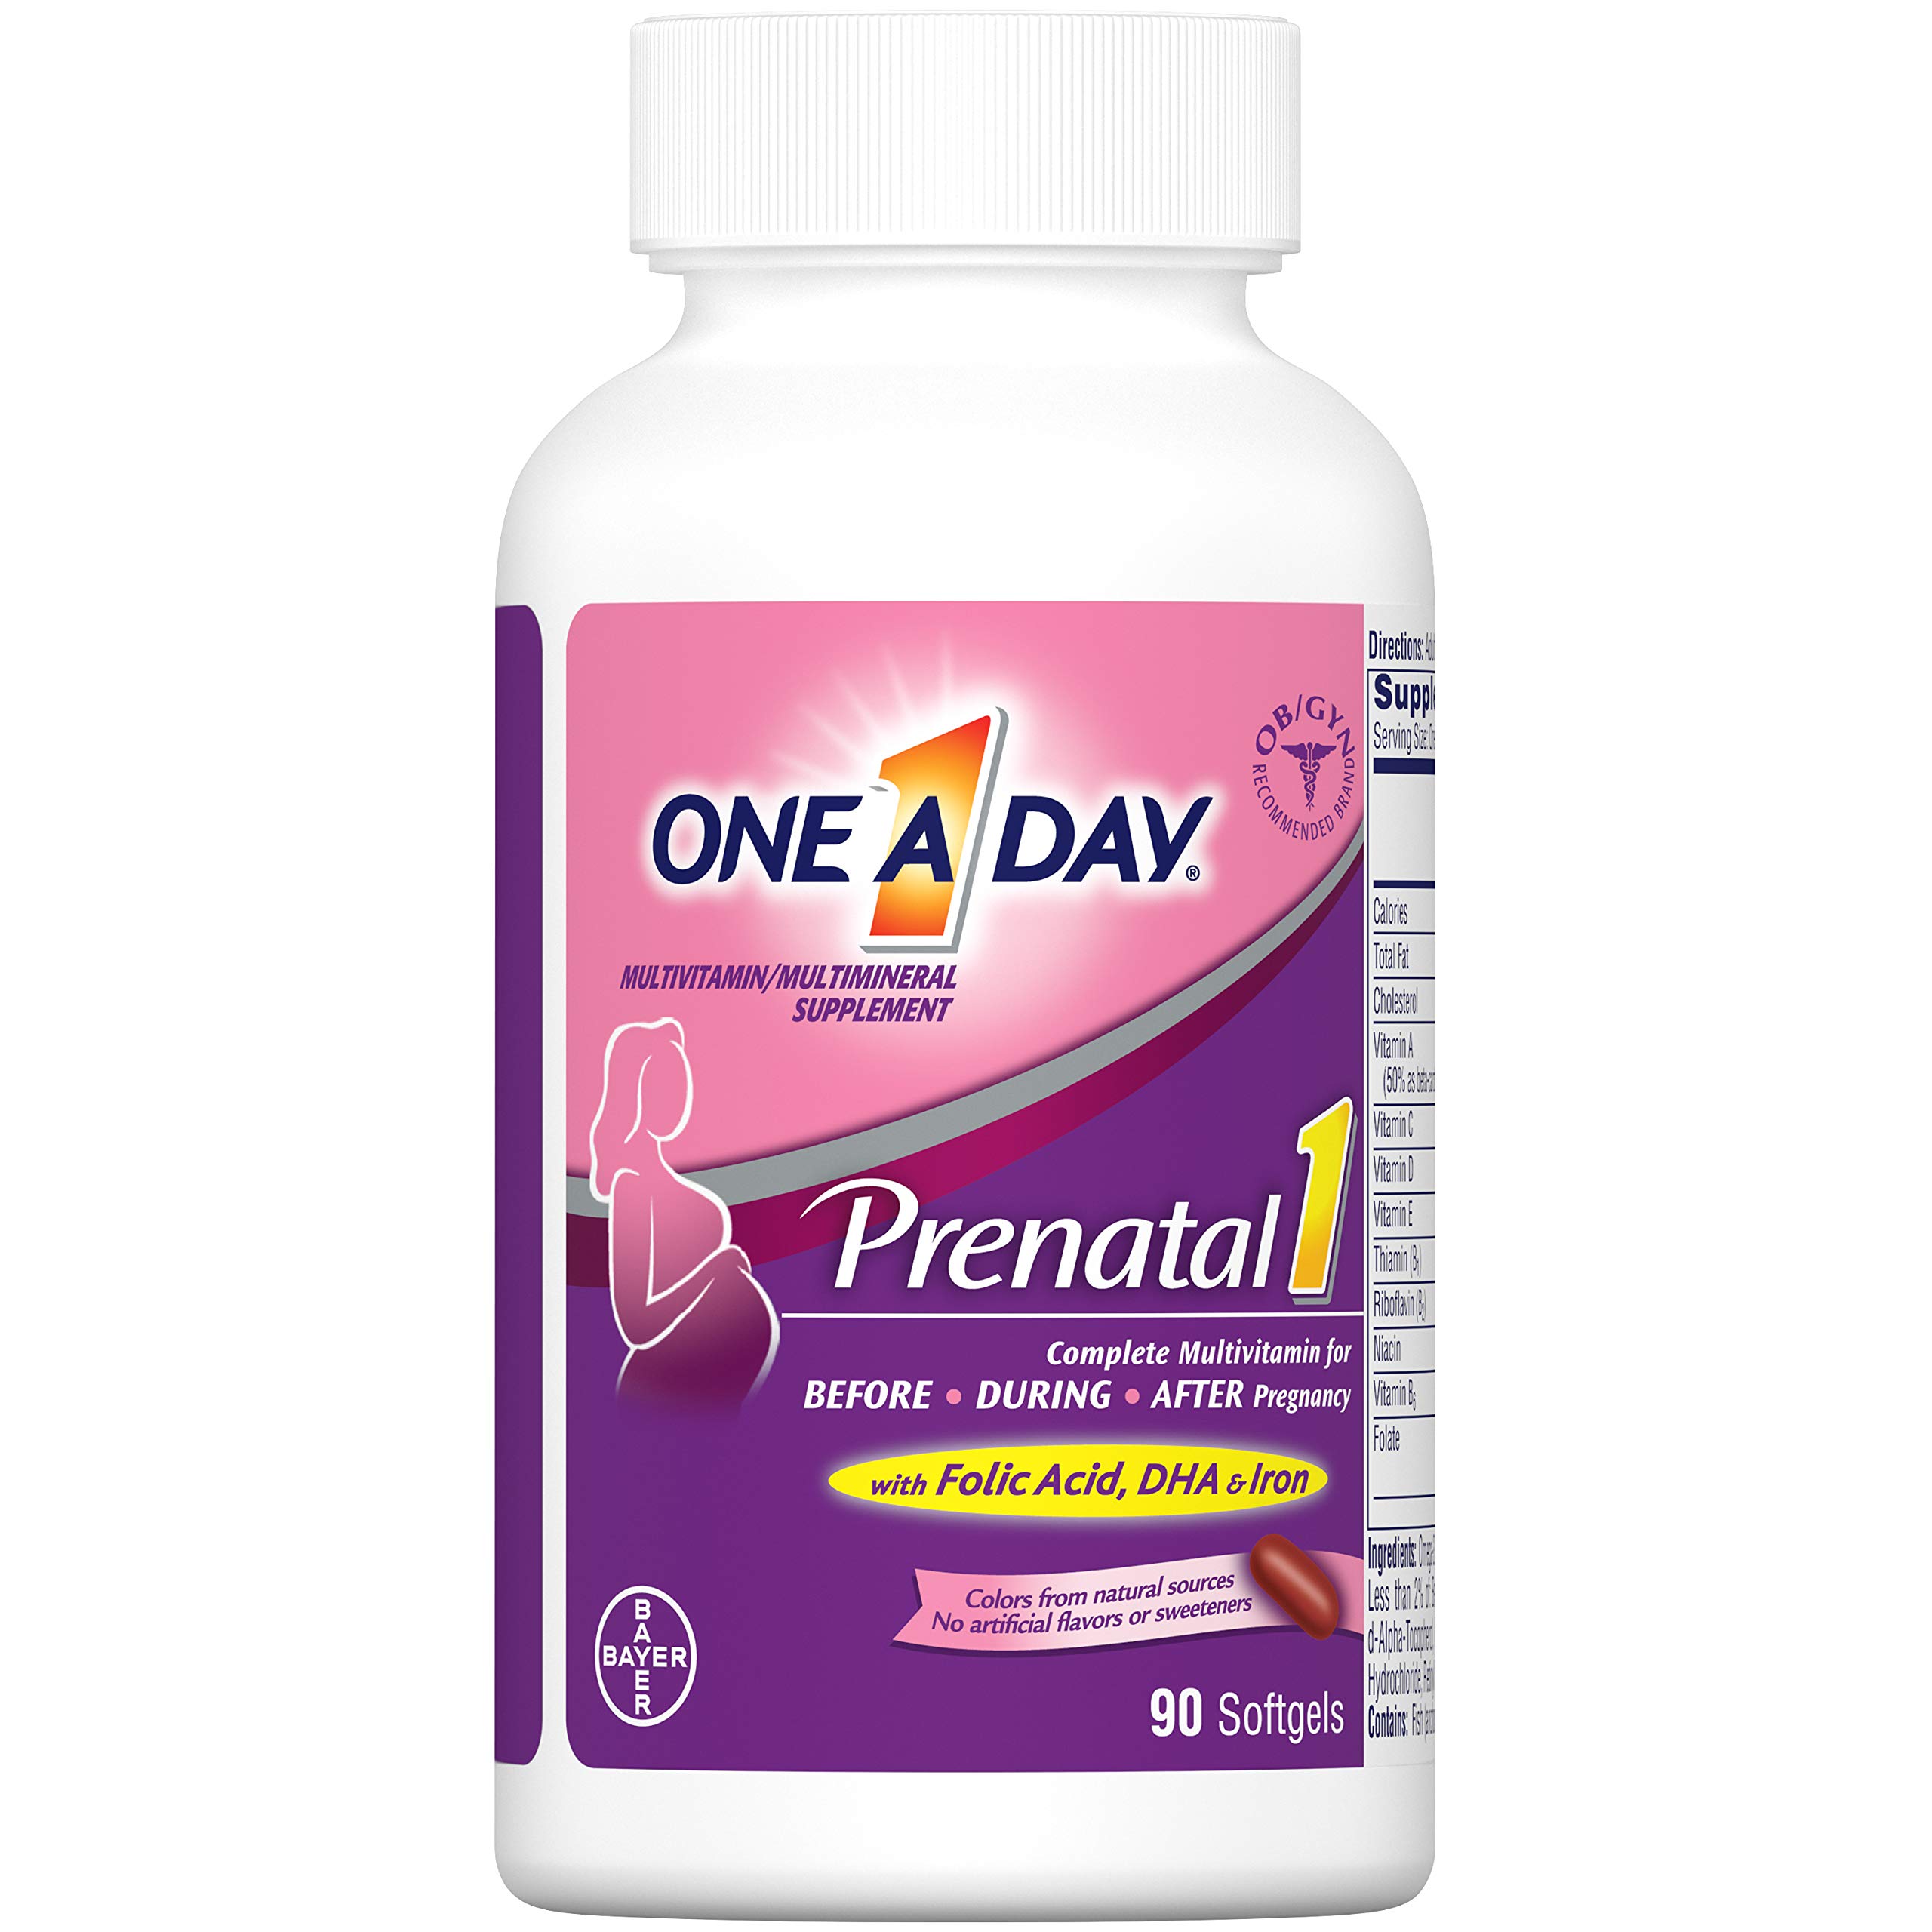 Mua One A Day Women's Prenatal 1 Multivitamin, Supplement for Before,  During, and Post Pregnancy, Including Vitamins A, C, D, E, B6, B12, and  Omega-3 DHA, 90 Count trên Amazon Mỹ chính